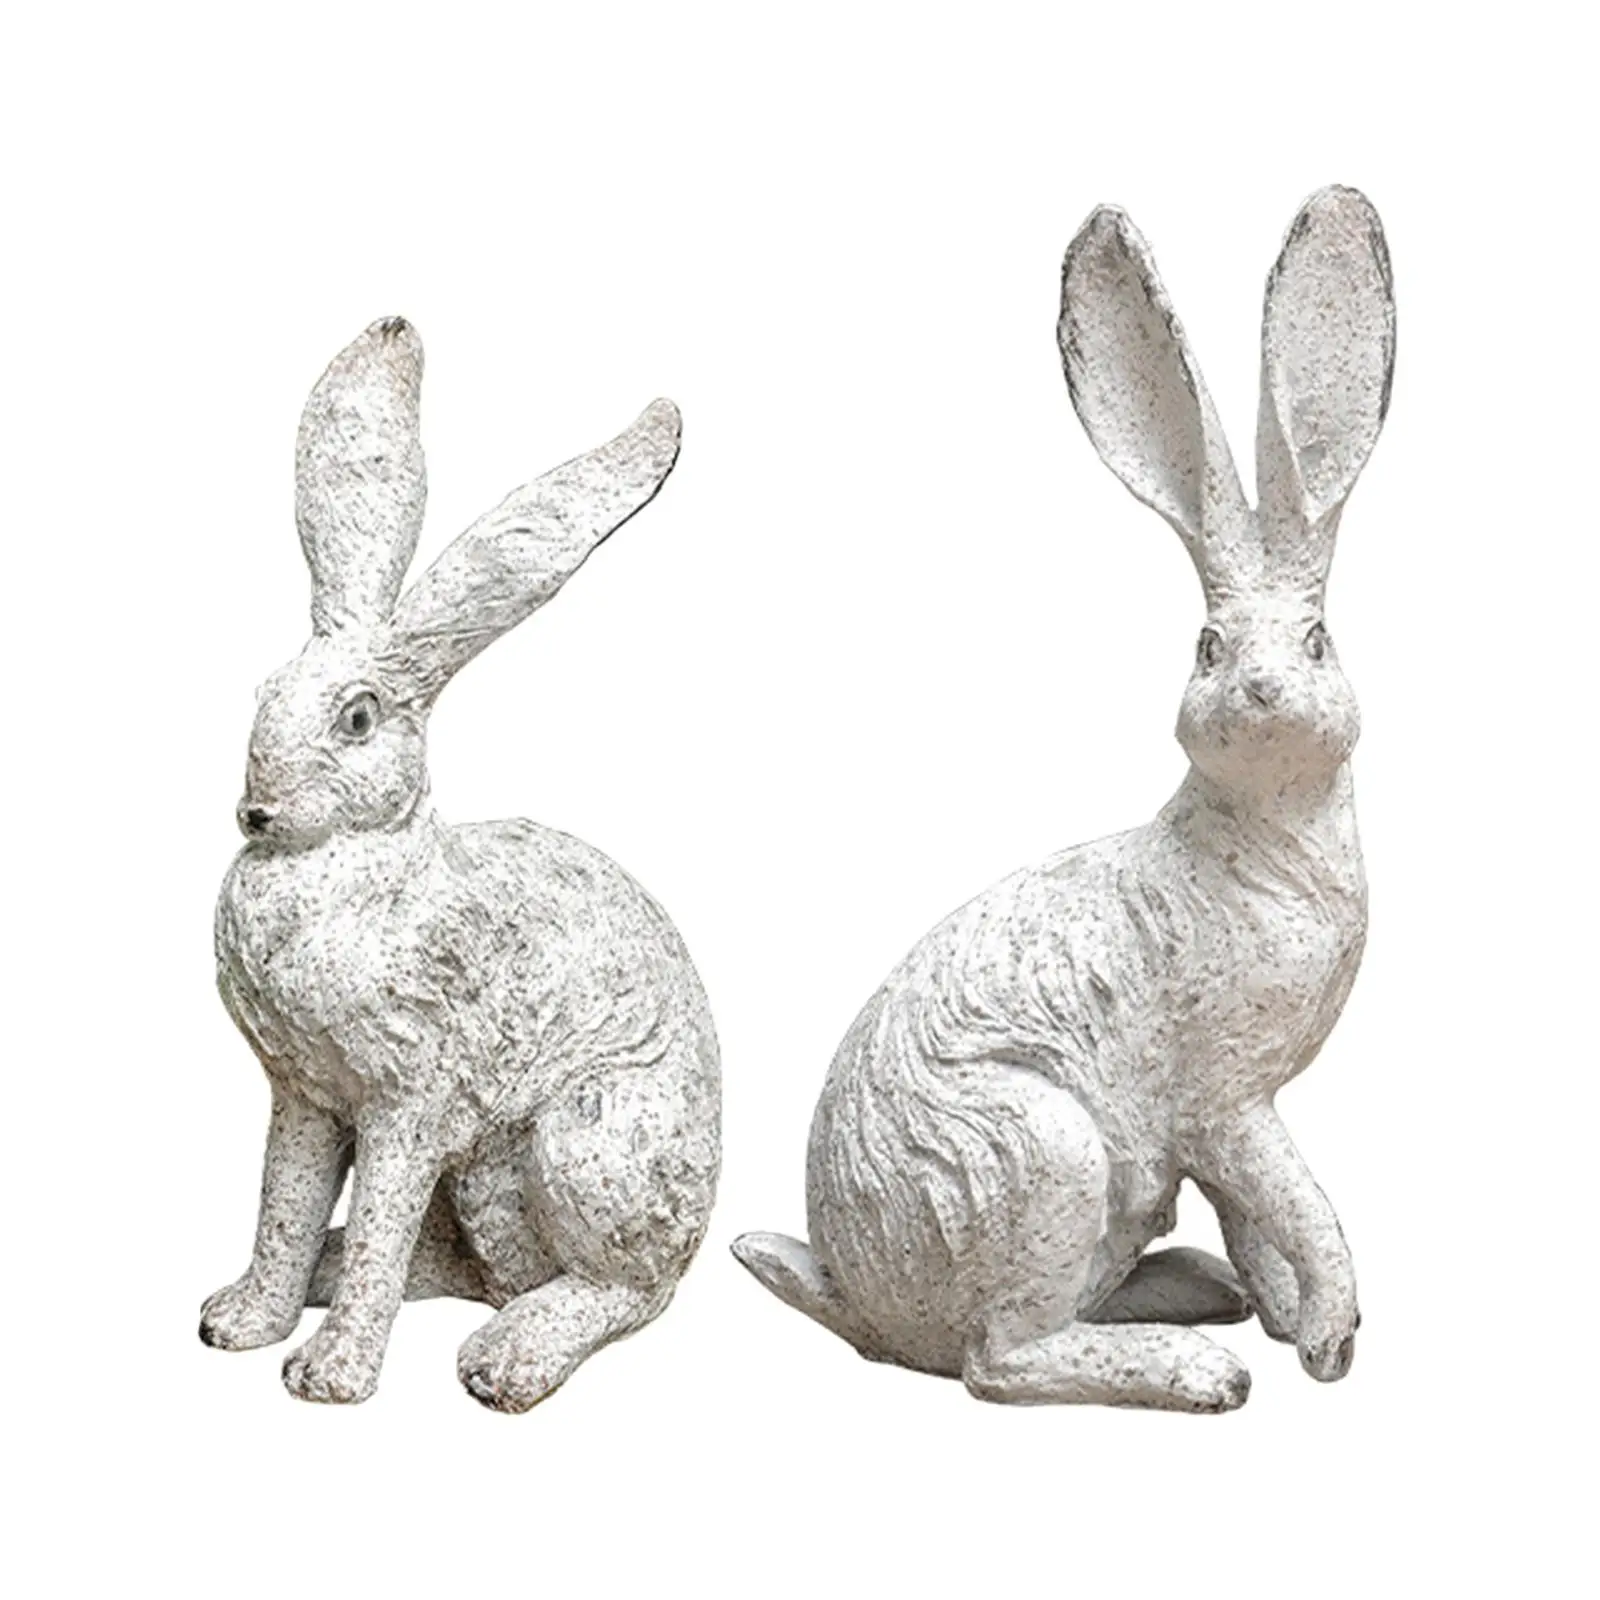 2x Desktop Ornaments Resin Statues Bunny Figurines Home Decor, Country Style Garden Decorations for Farmhouse,Outdoors,Office